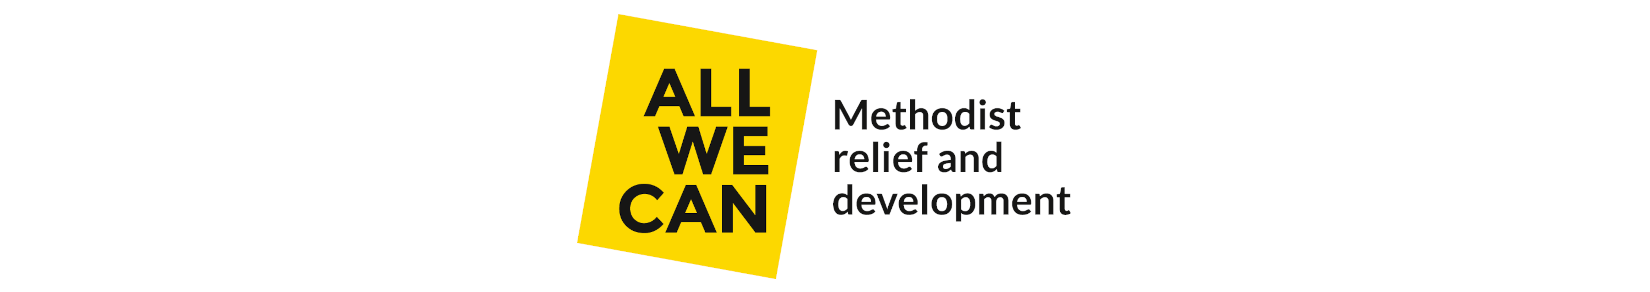 All We Can logo tagline Methodist relief and development